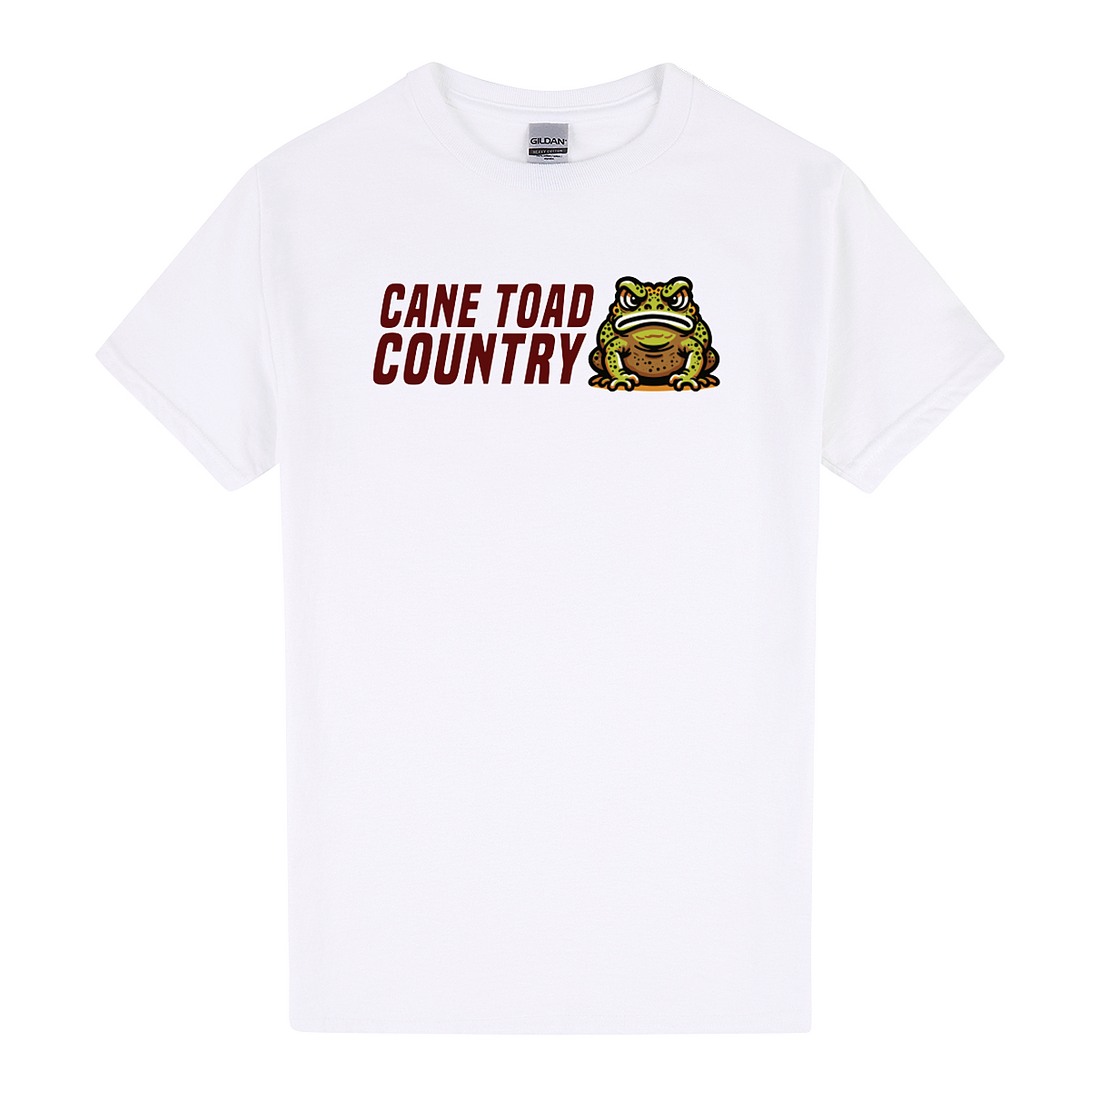 Cane Toad Country Tee